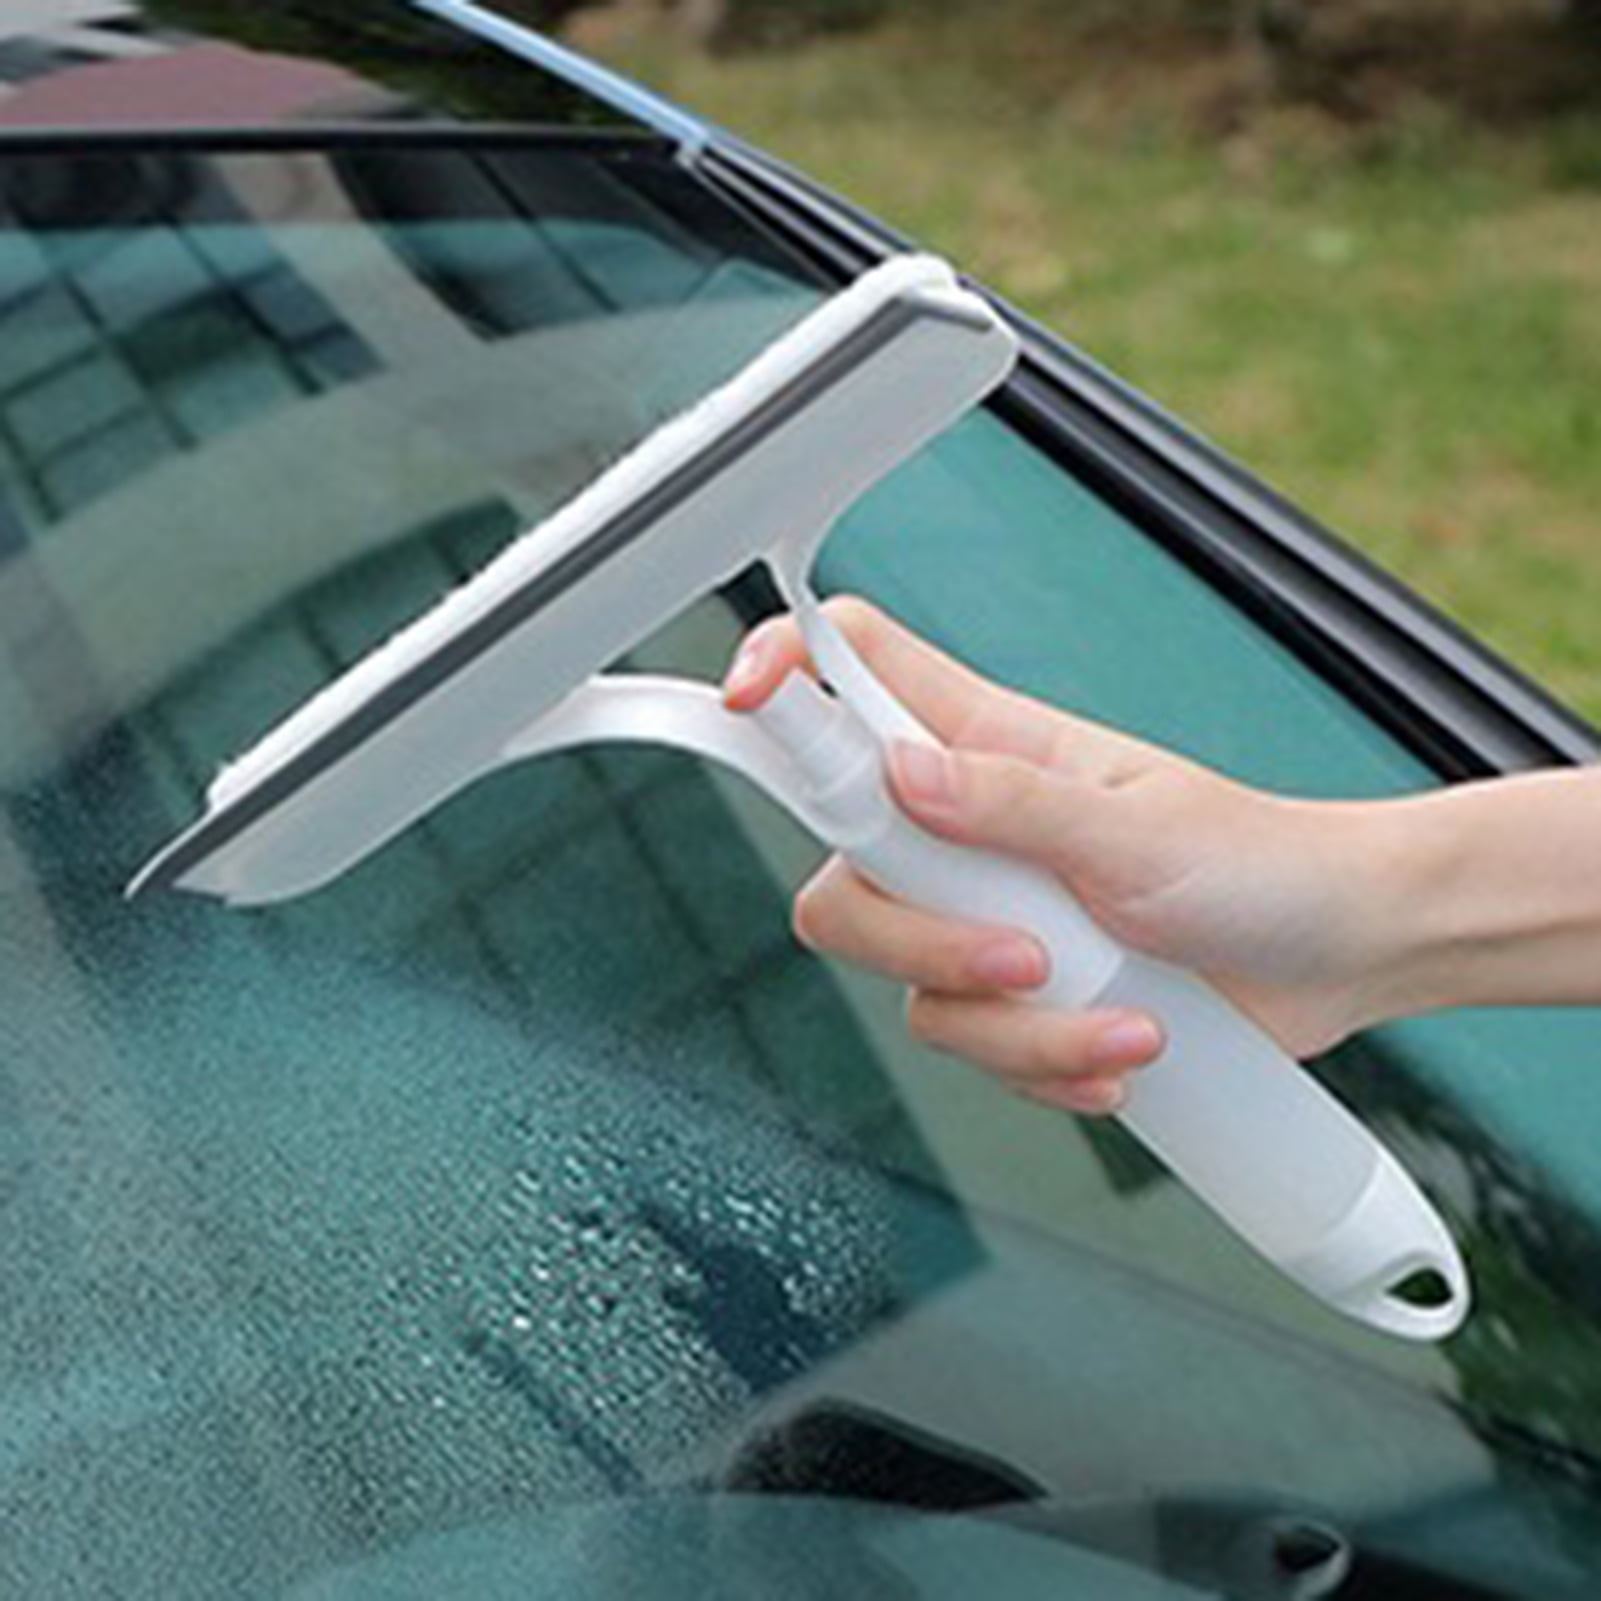 3 In 1 Windows Cleaning Wiper Glass Brush Household Cleaning Tools  Multi-Purpose Silicone Squeegee For shower Door Car Windshield-Blue